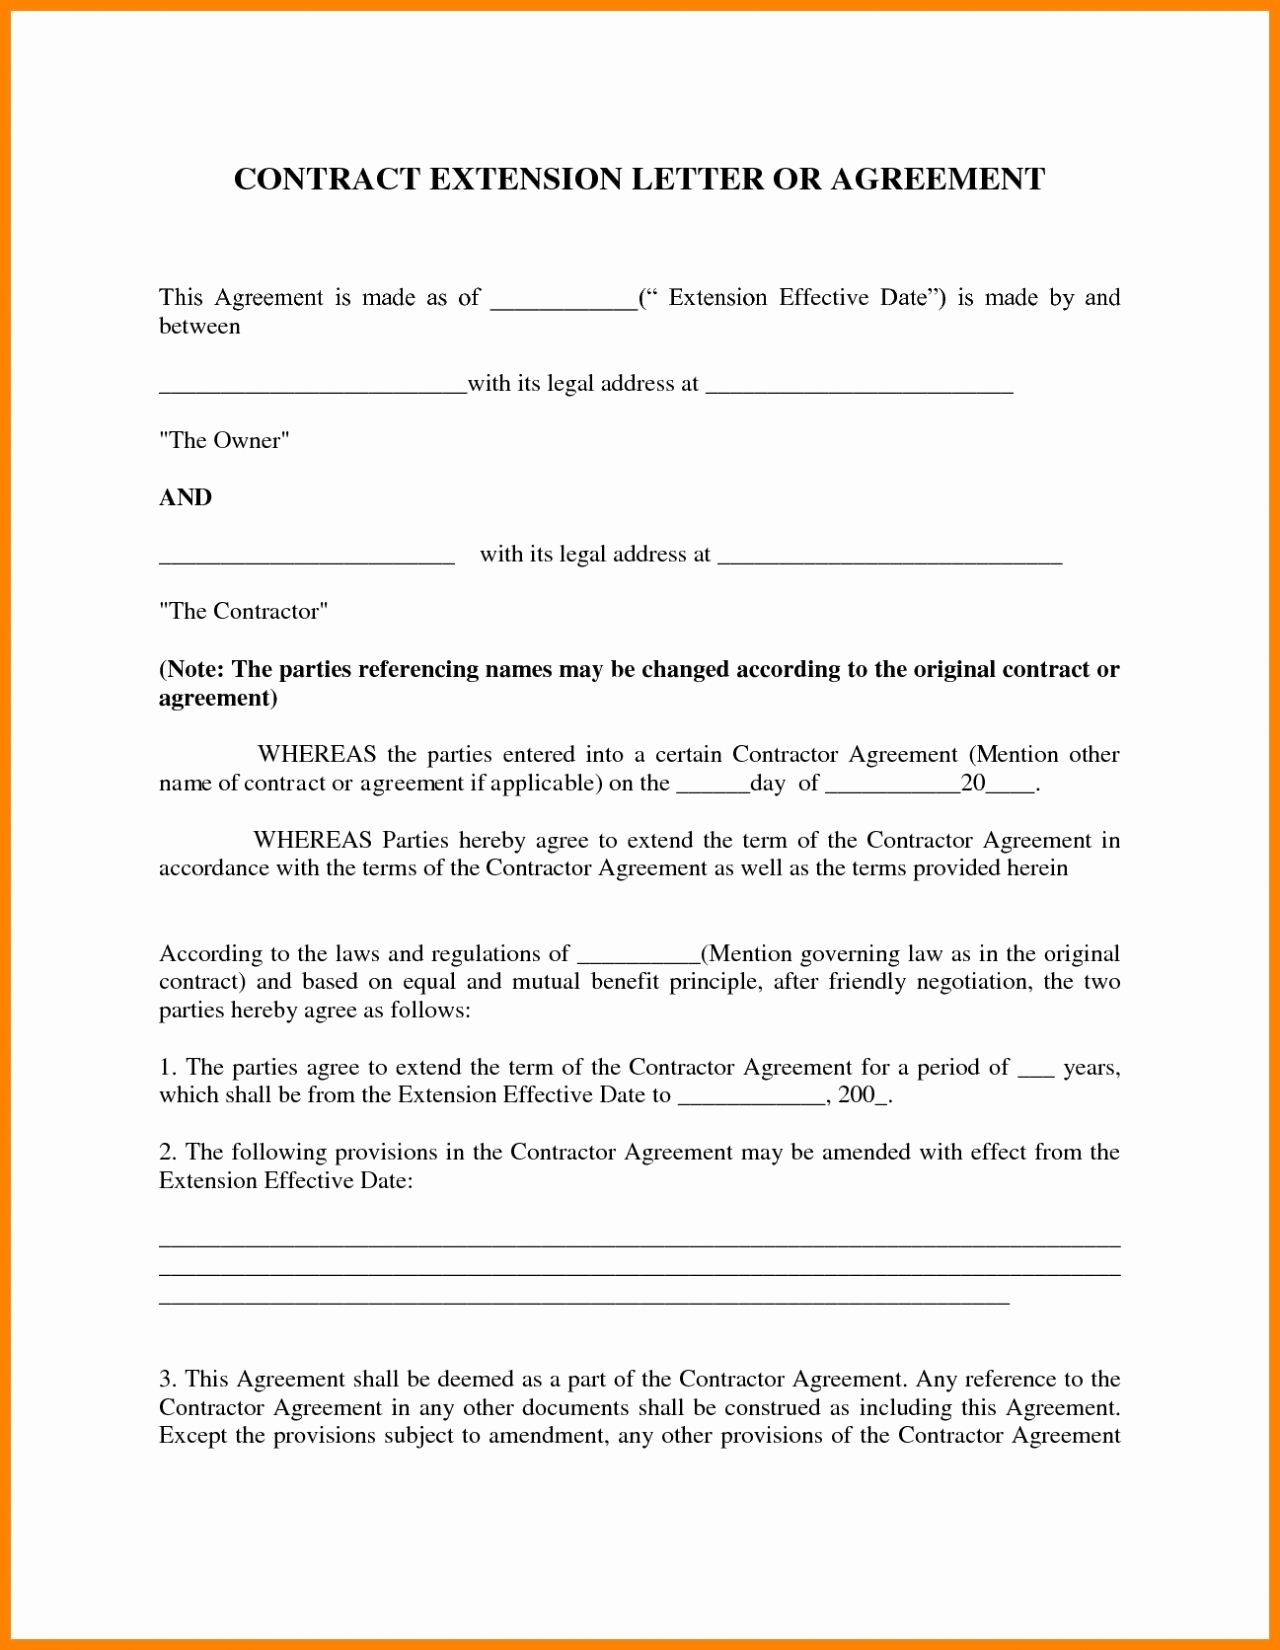 Parent Letter to Child Template - Casual Employment Contract Template 31 50 Elegant Free Parent Child